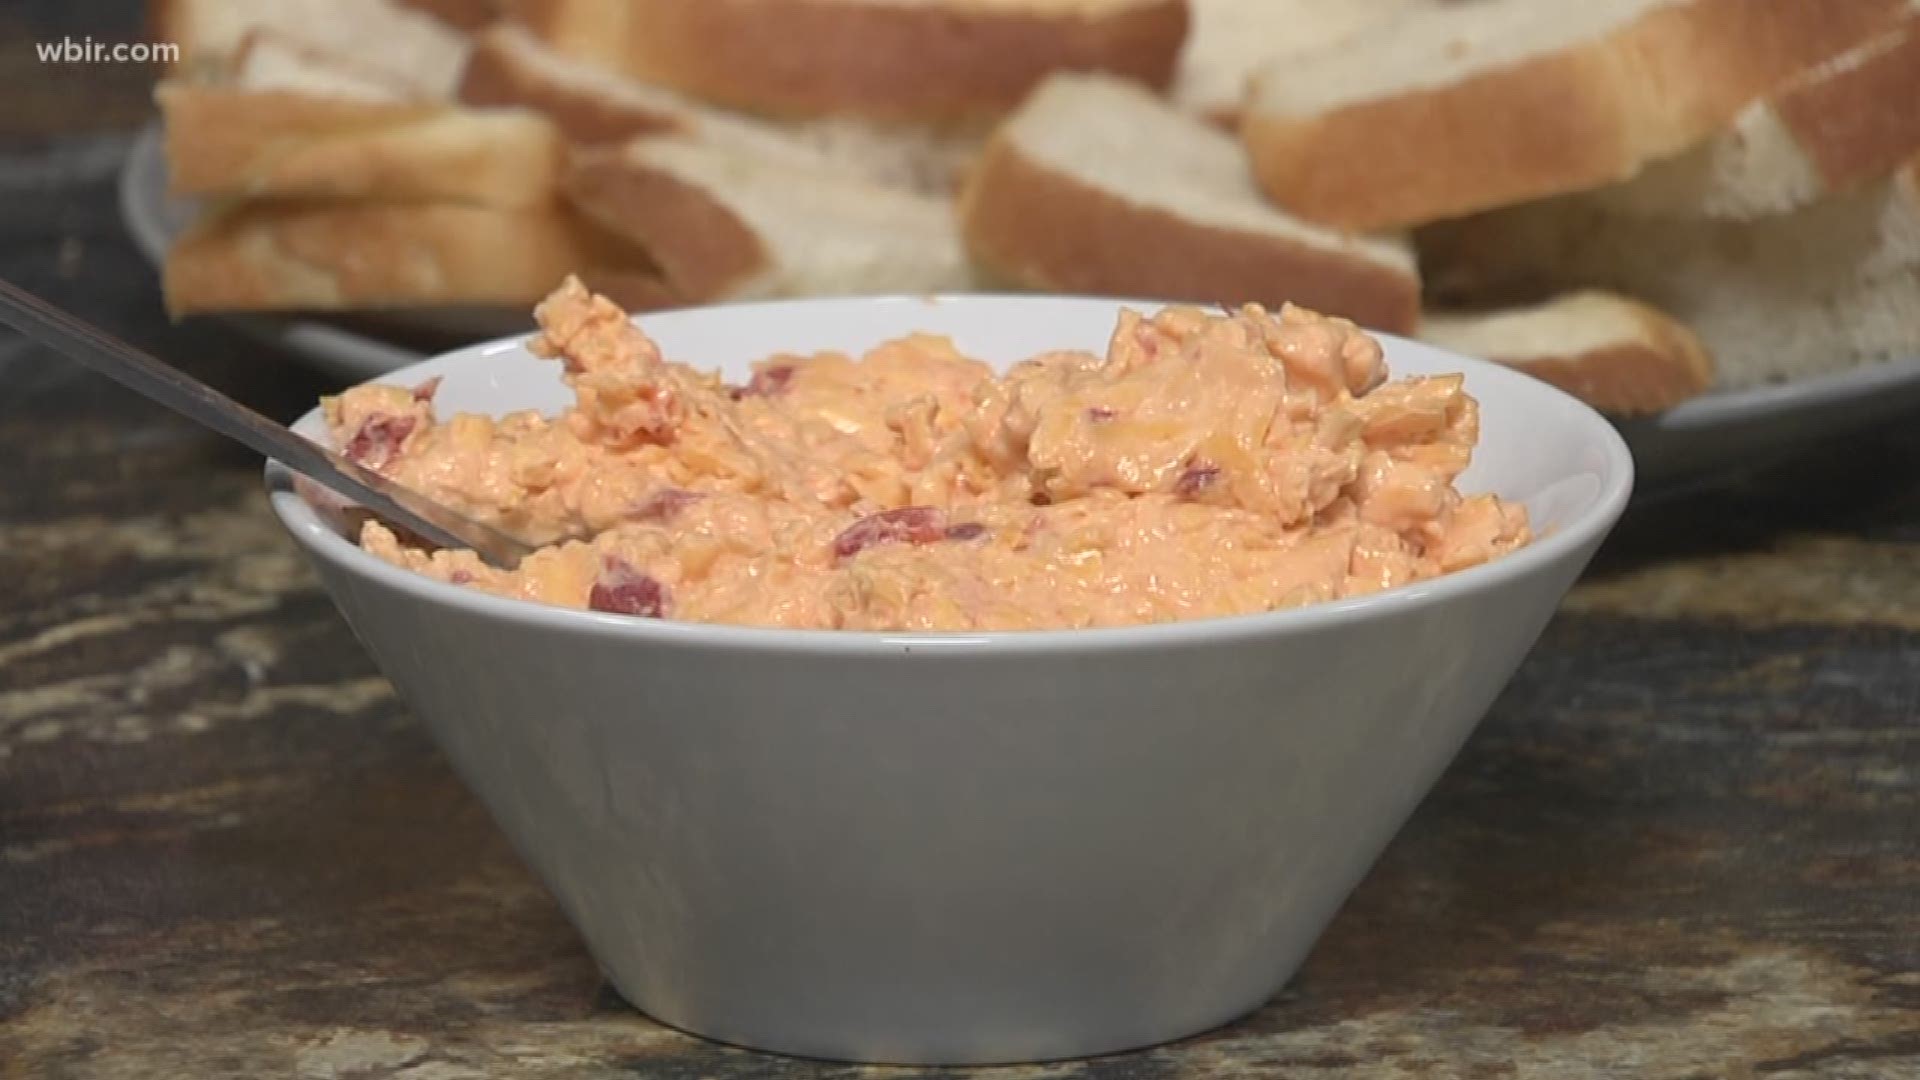 Miss Olivia shares her recipe for a southern staple, pimento cheese spread.